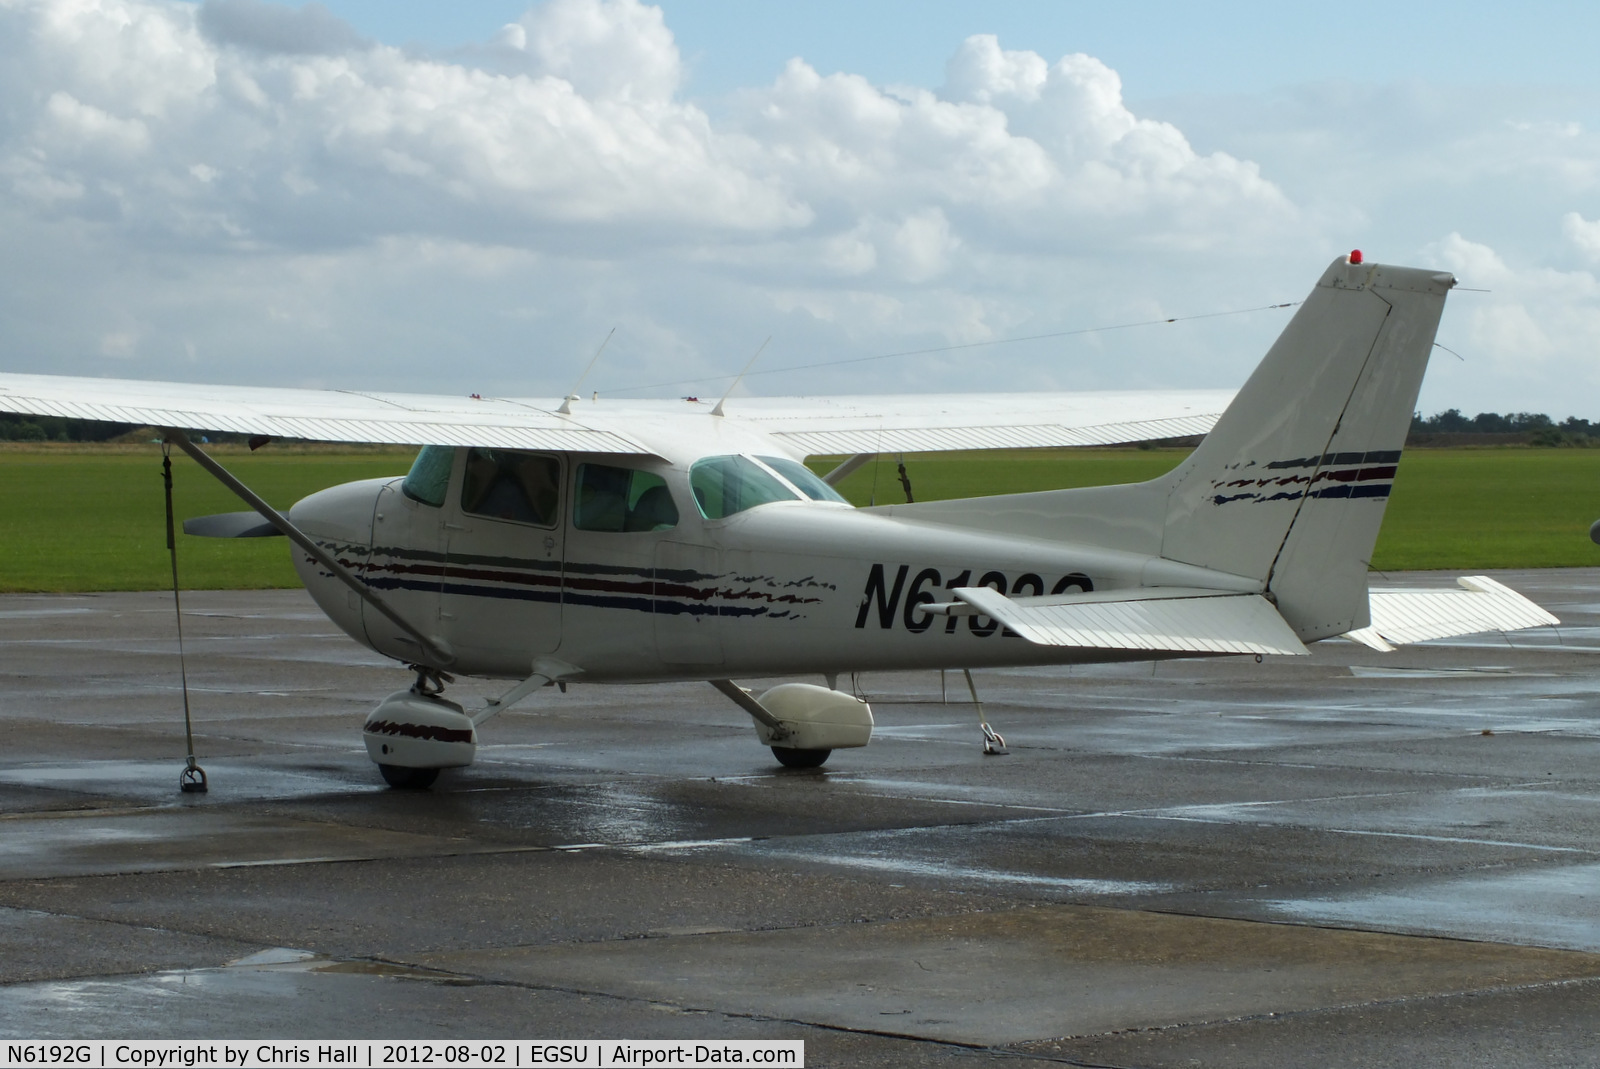 N6192G, 1969 Cessna 150K C/N 15071692, on the apron at Duxford